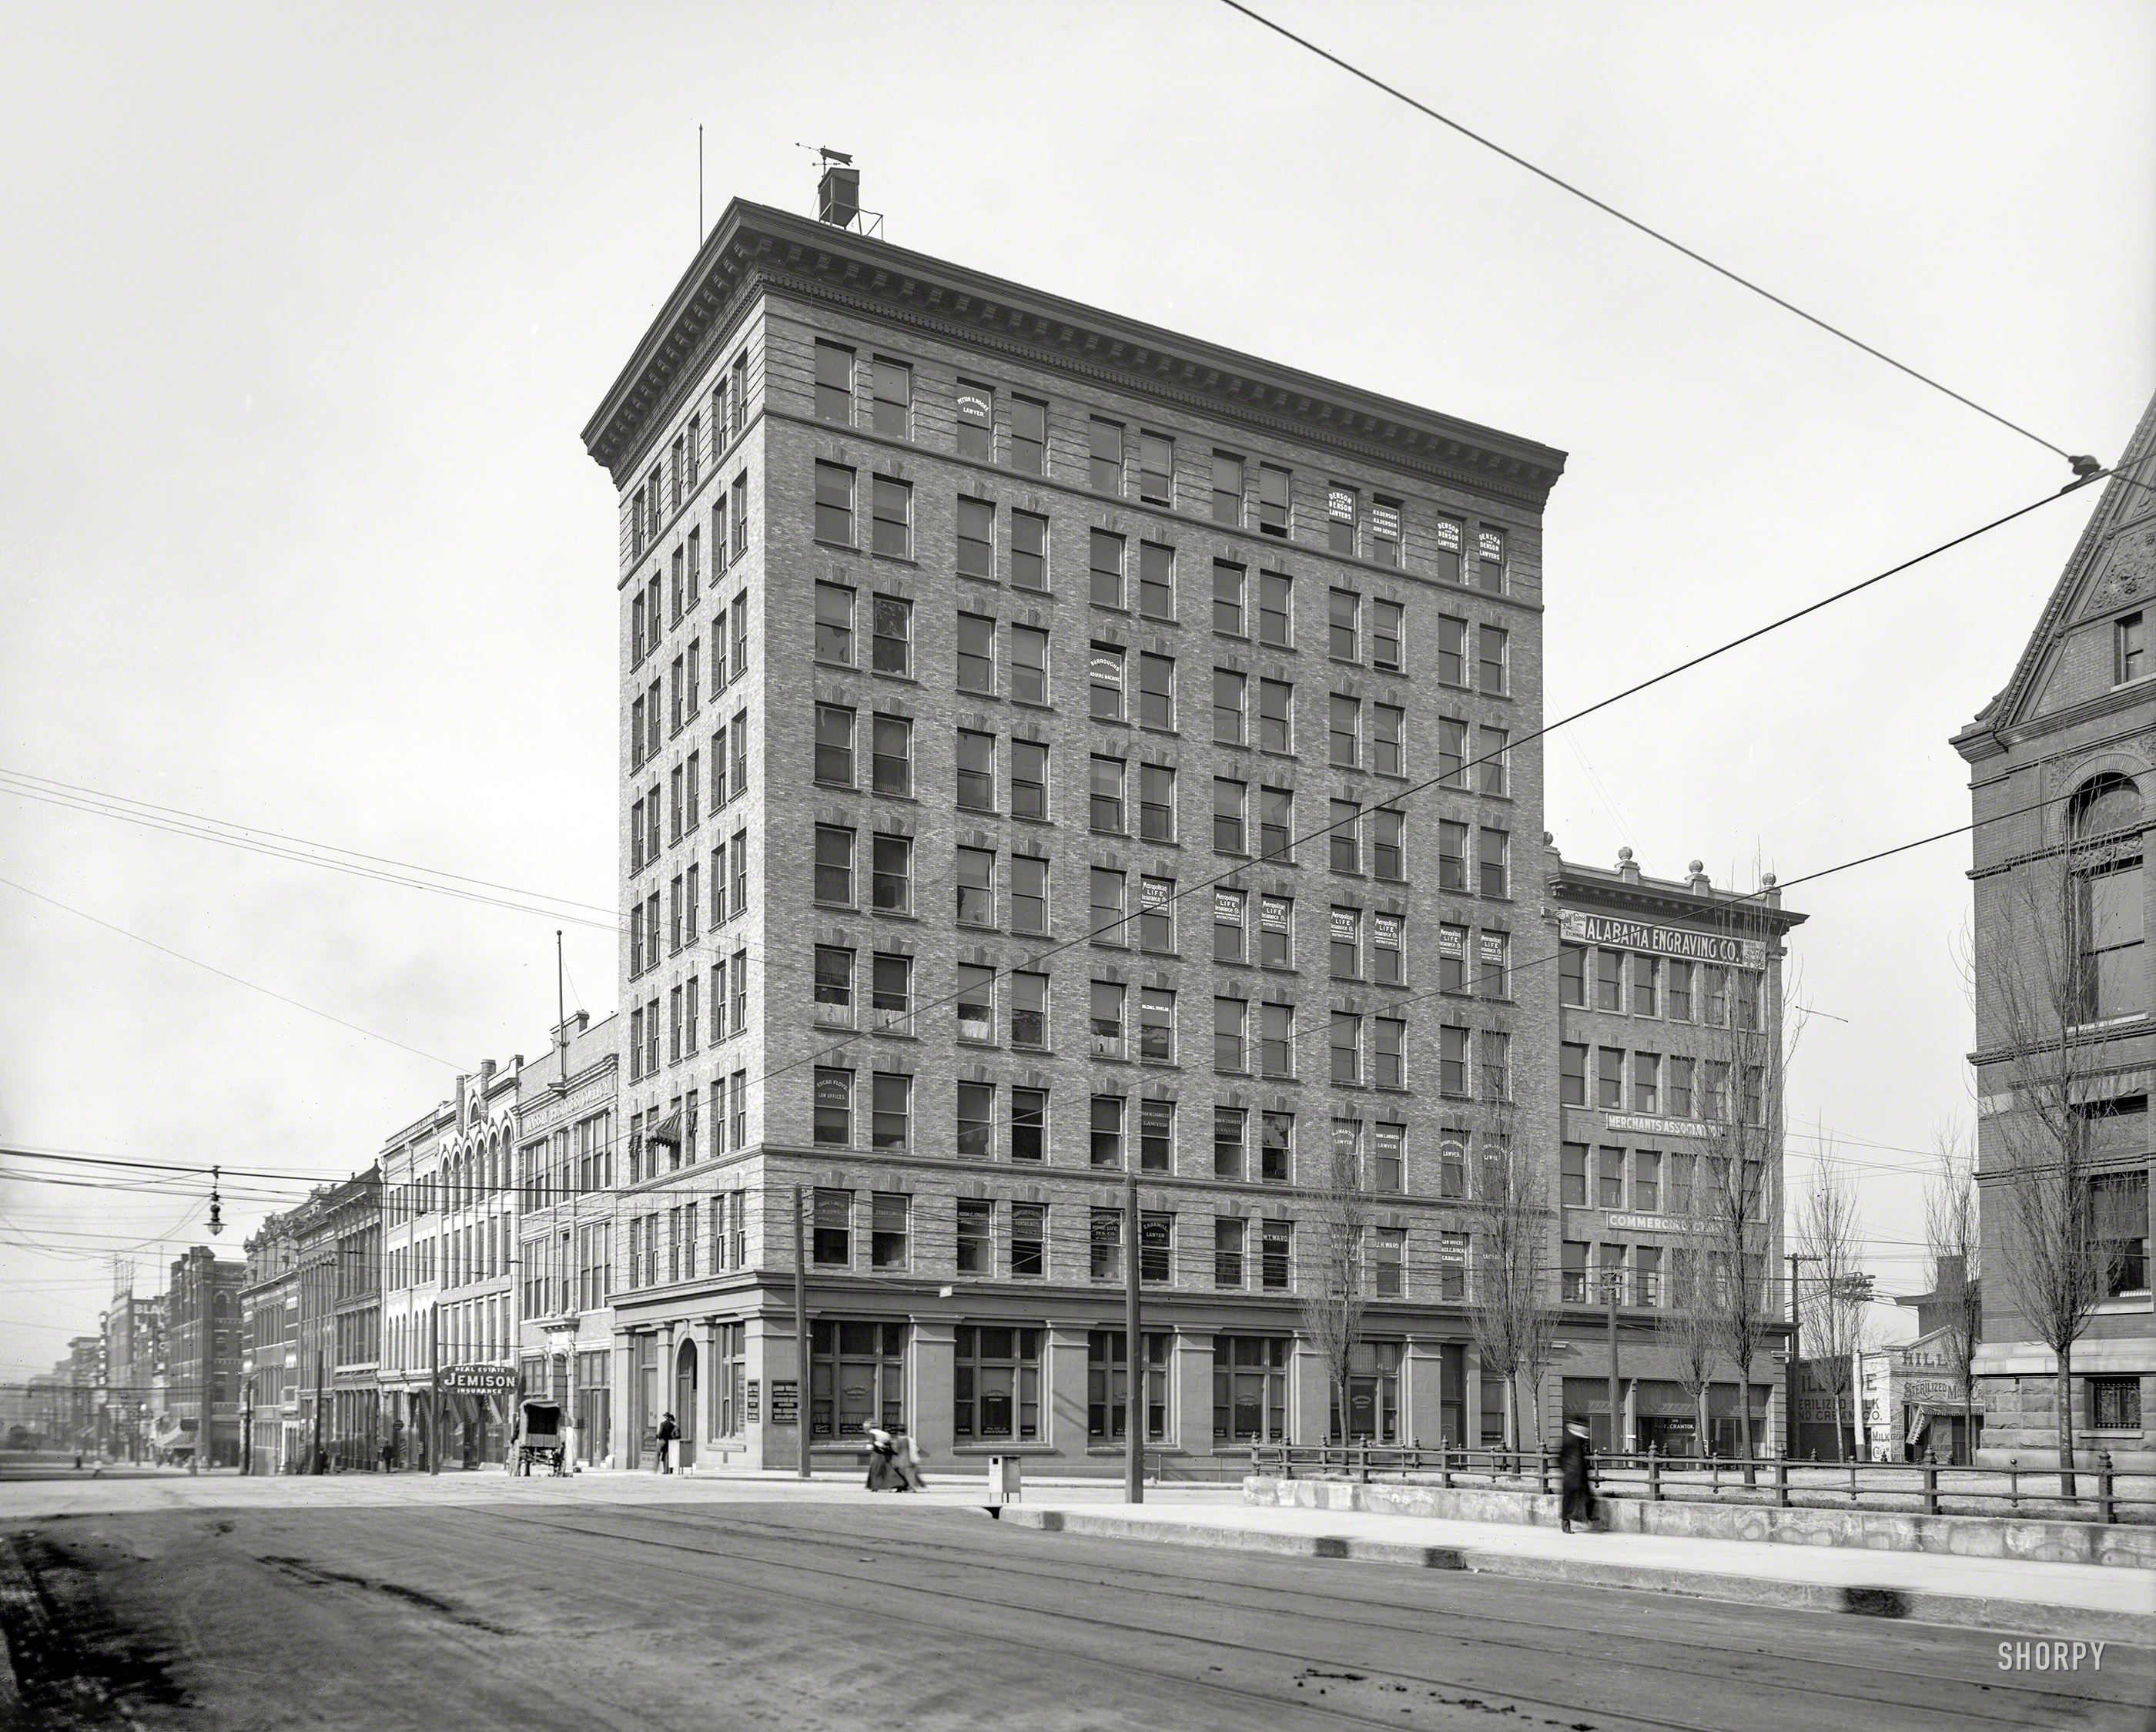 Birmingham, Alabama, circa 1906. "Title Guarantee Land and Trust Building." Completed in 1903, the structure still stands at Third Avenue and 21st Street. 8x10 inch dry plate glass negative, Detroit Publishing Company. View full size.